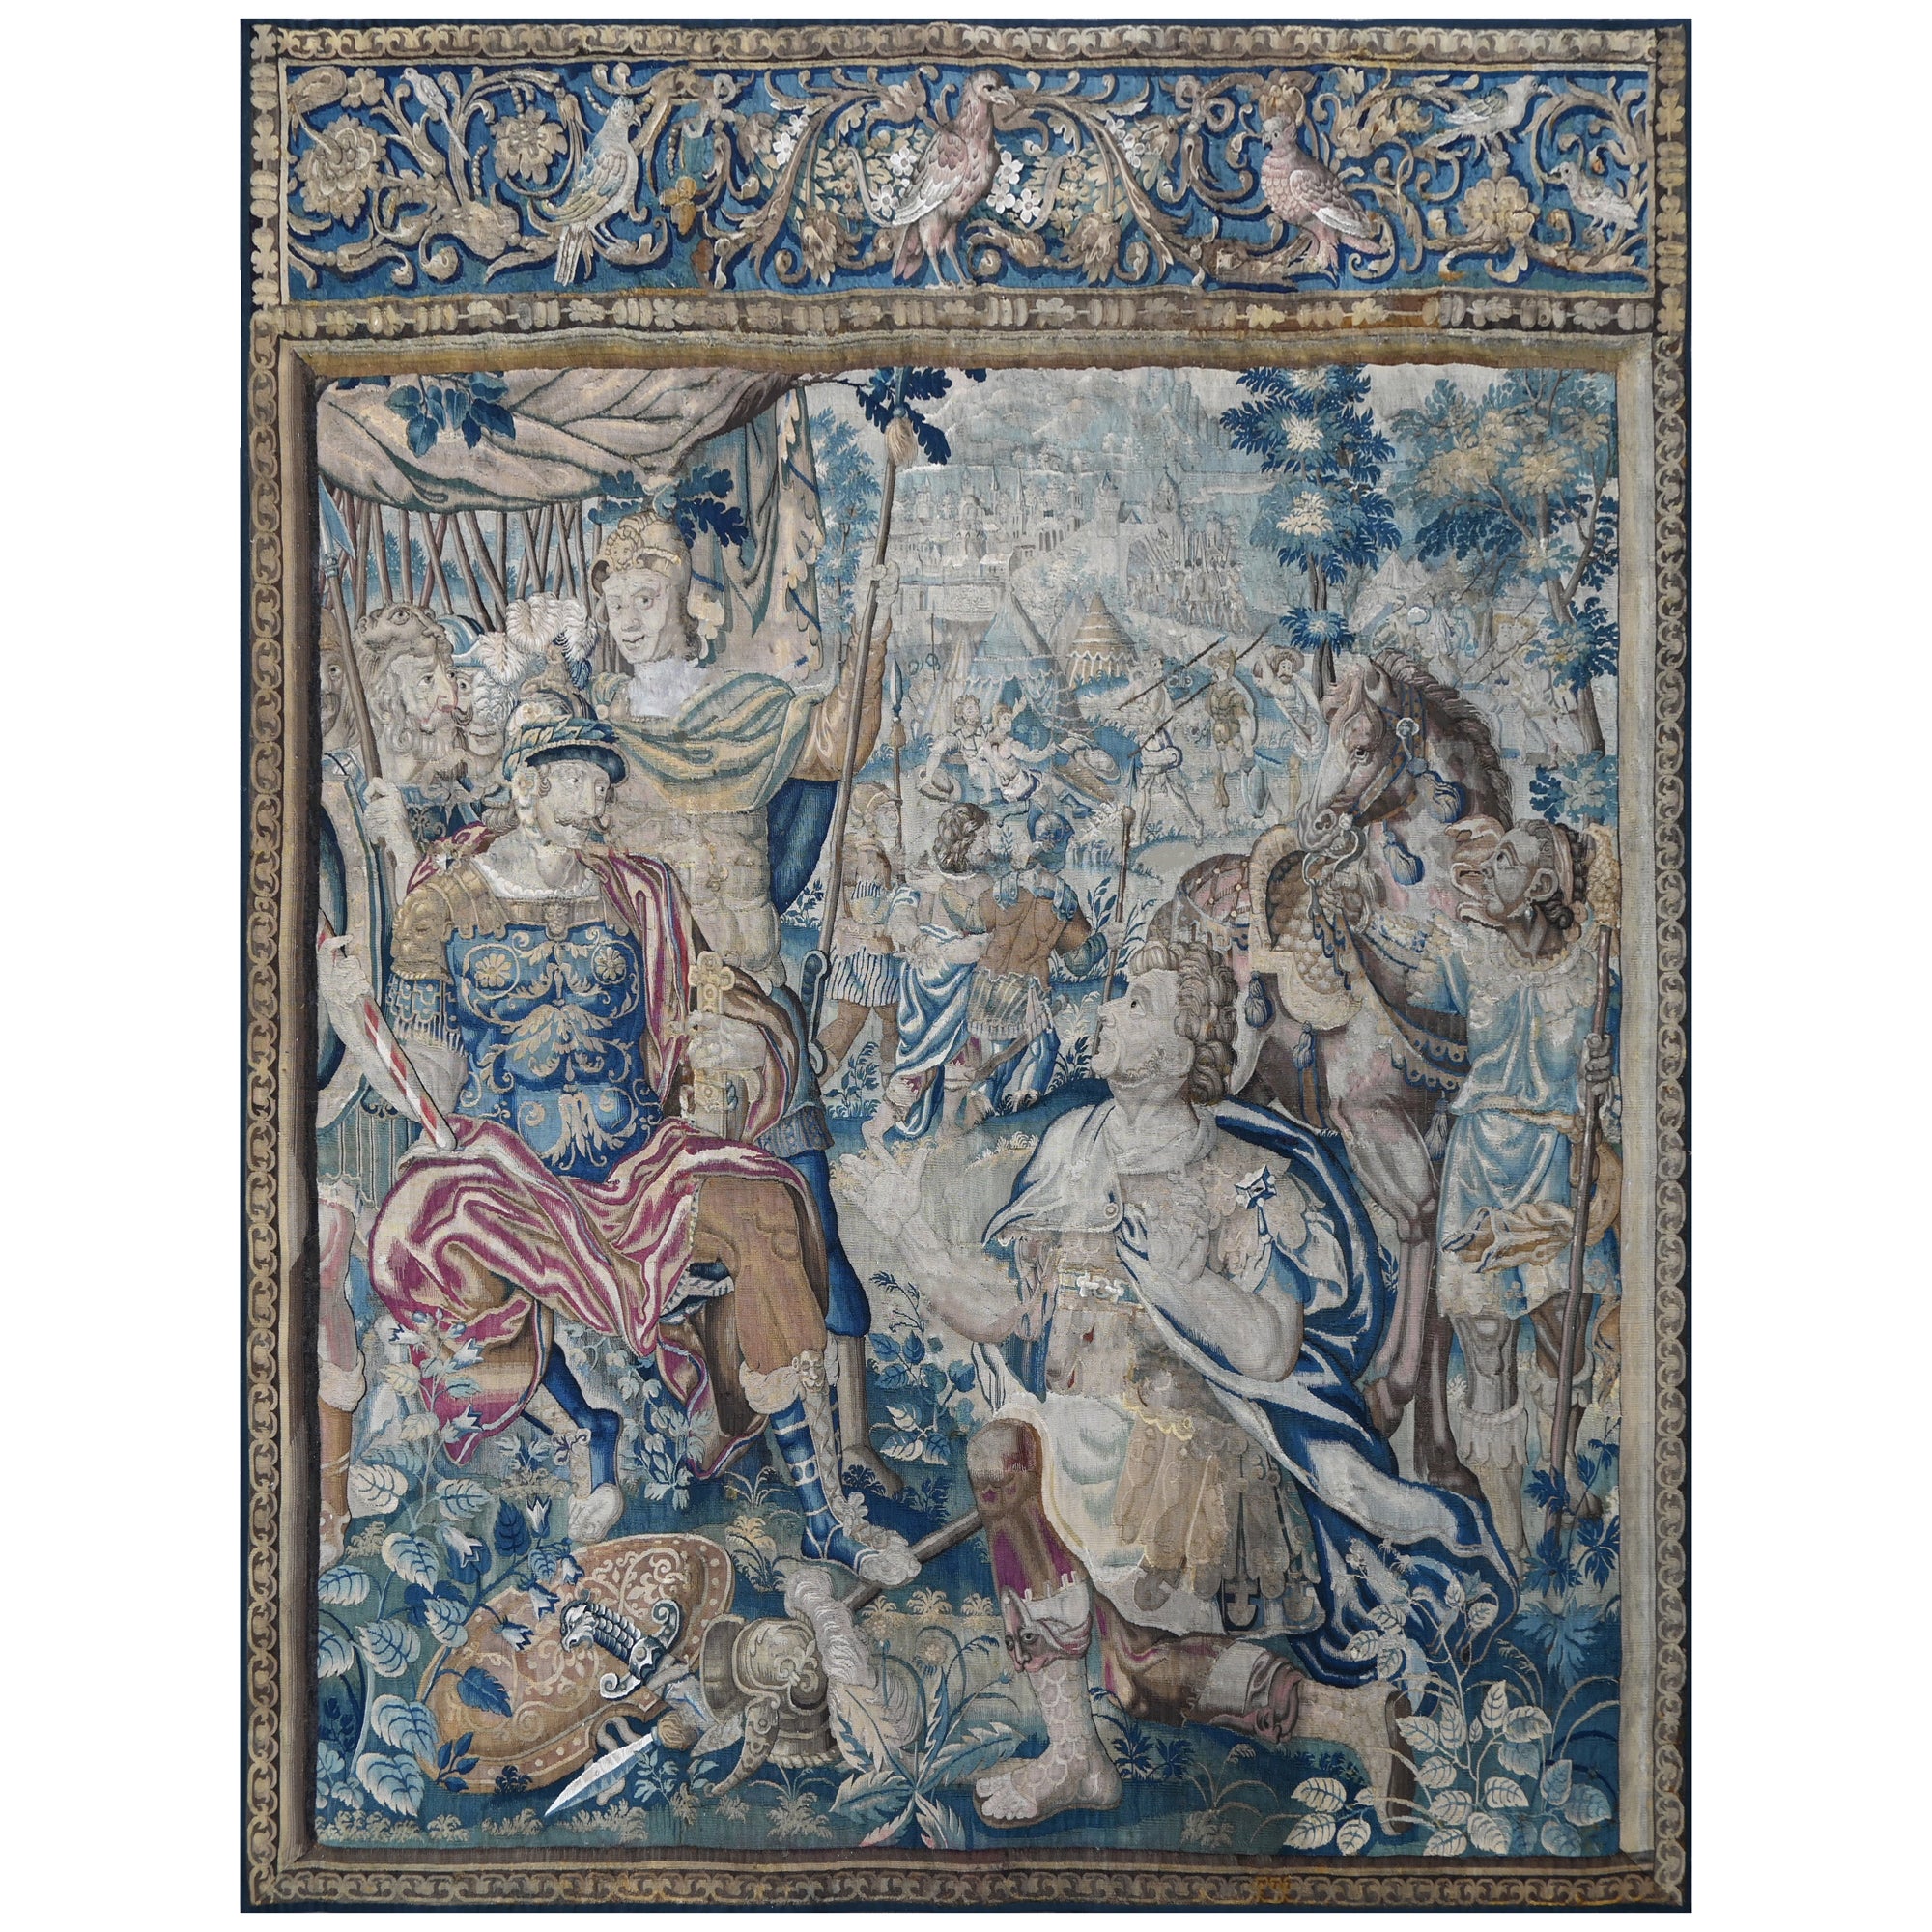 Tapestry Manufacture Brussels, Mid 17th - The Capture Of Rome 410 Ad - No. 1375 For Sale